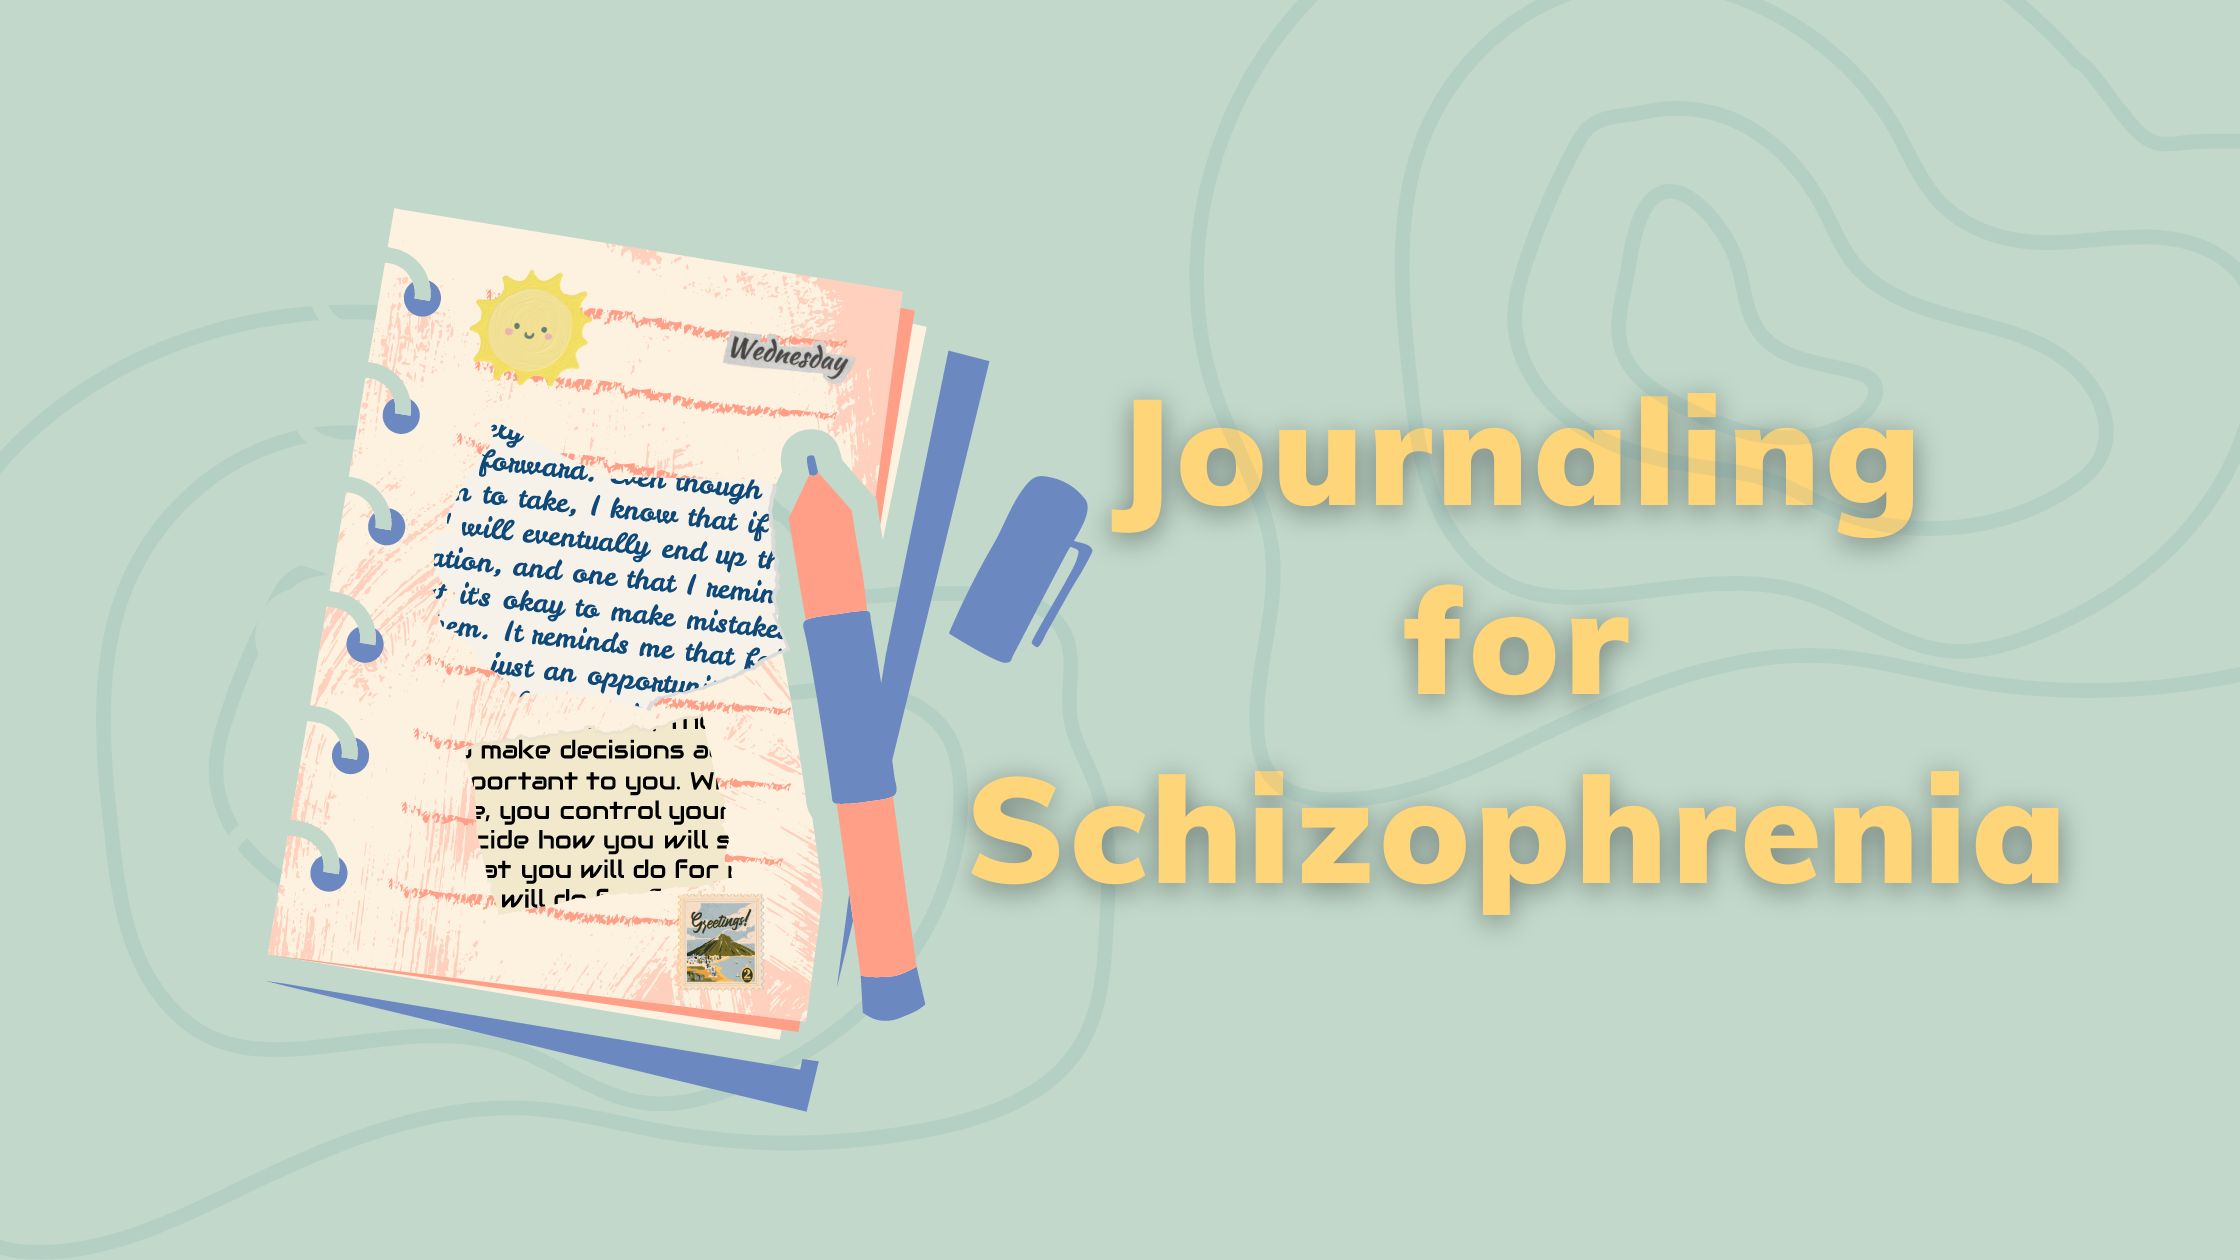 Journaling for Schizophrenia and Its Benefits